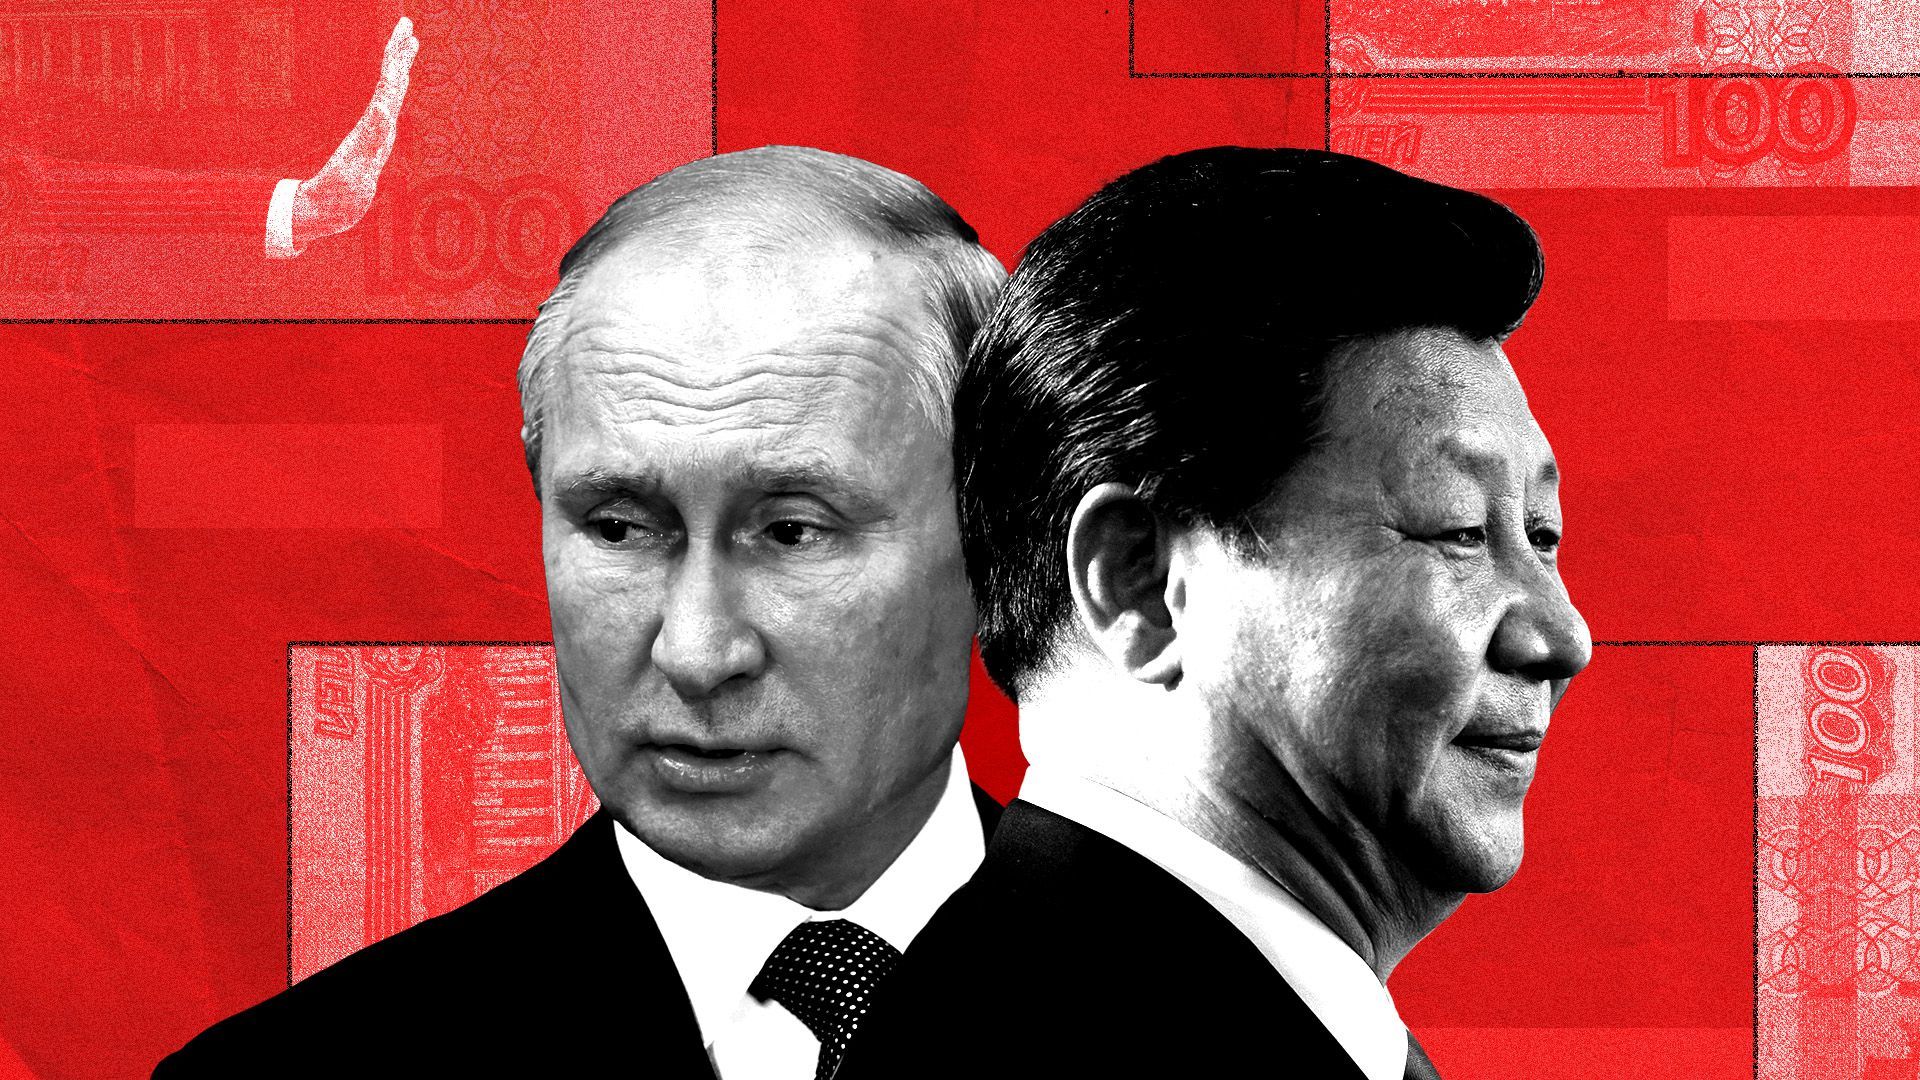 Photo illustration of Russian President Vladimir Putin and Chinese President Xi Jinping with Russian banknotes and an outstretched hand